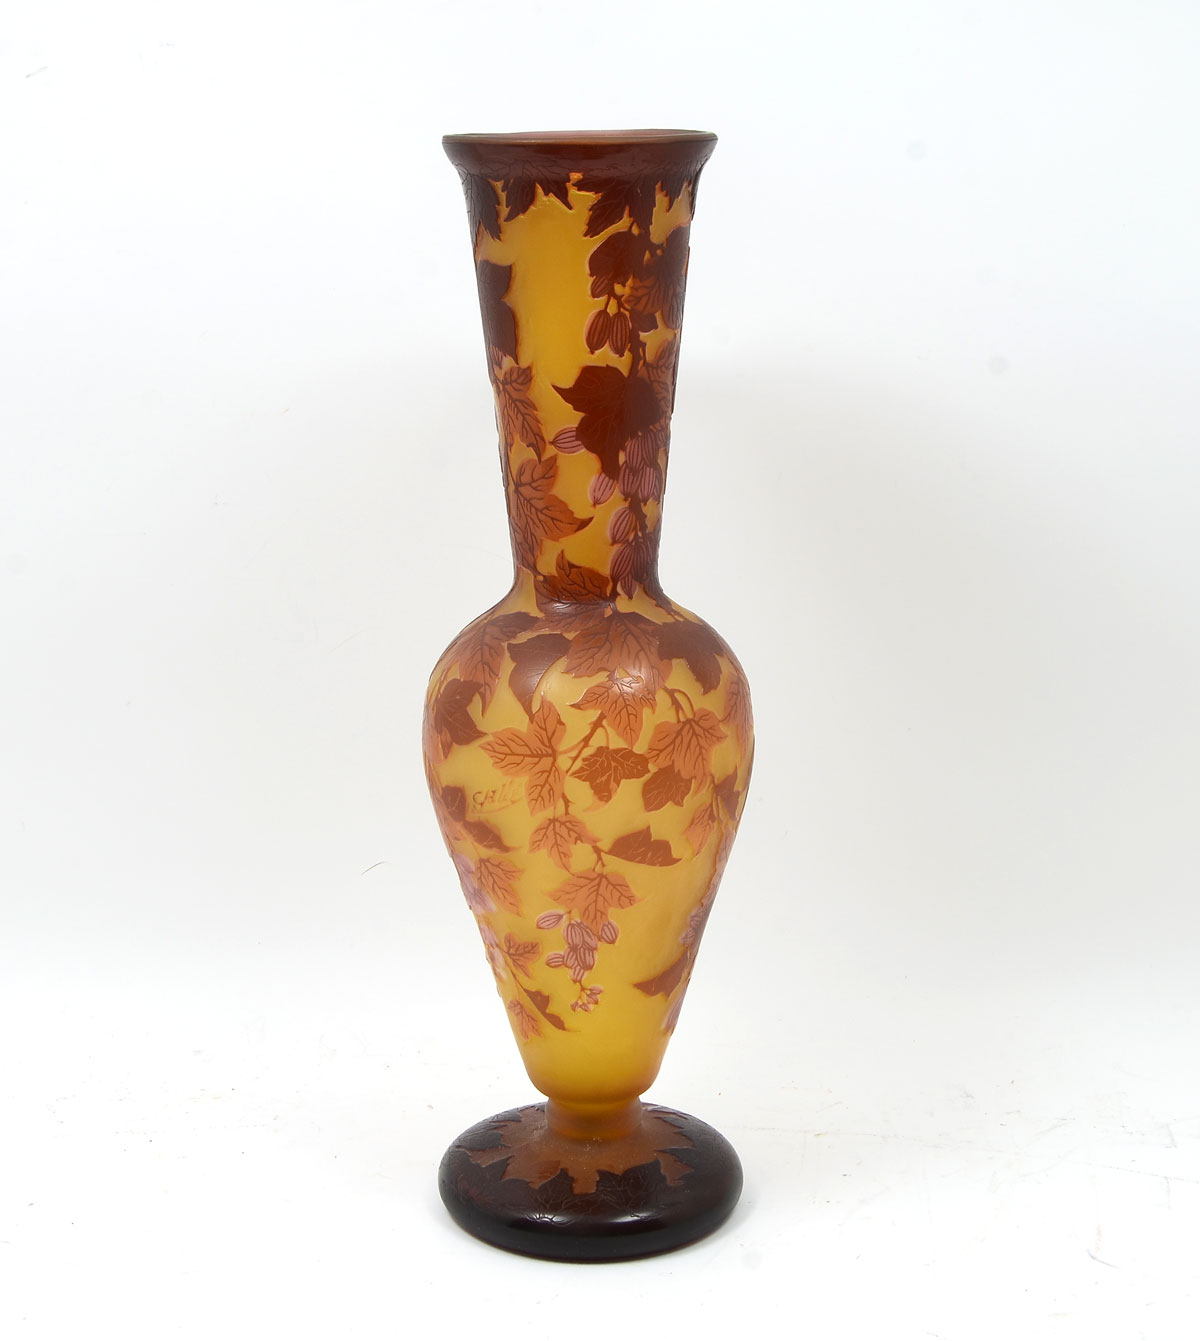 TALL GALLE STYLE VASE AMBER: Amber